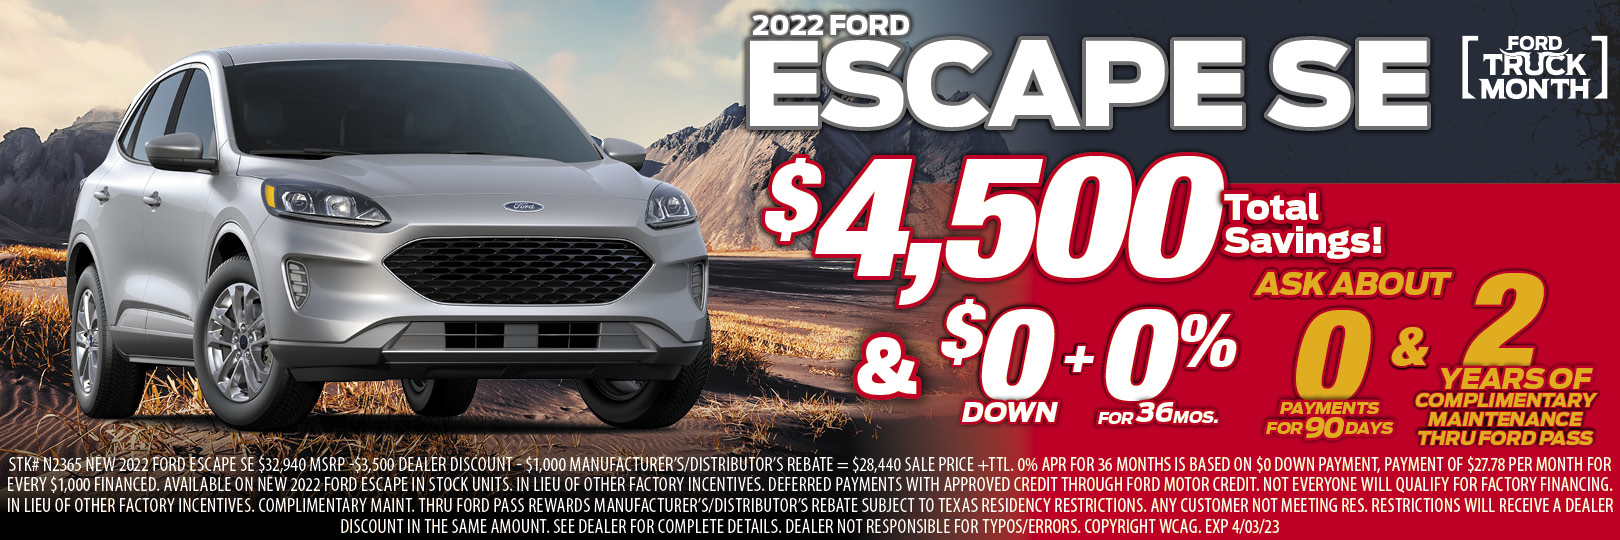 New Ford Escape Special Offers